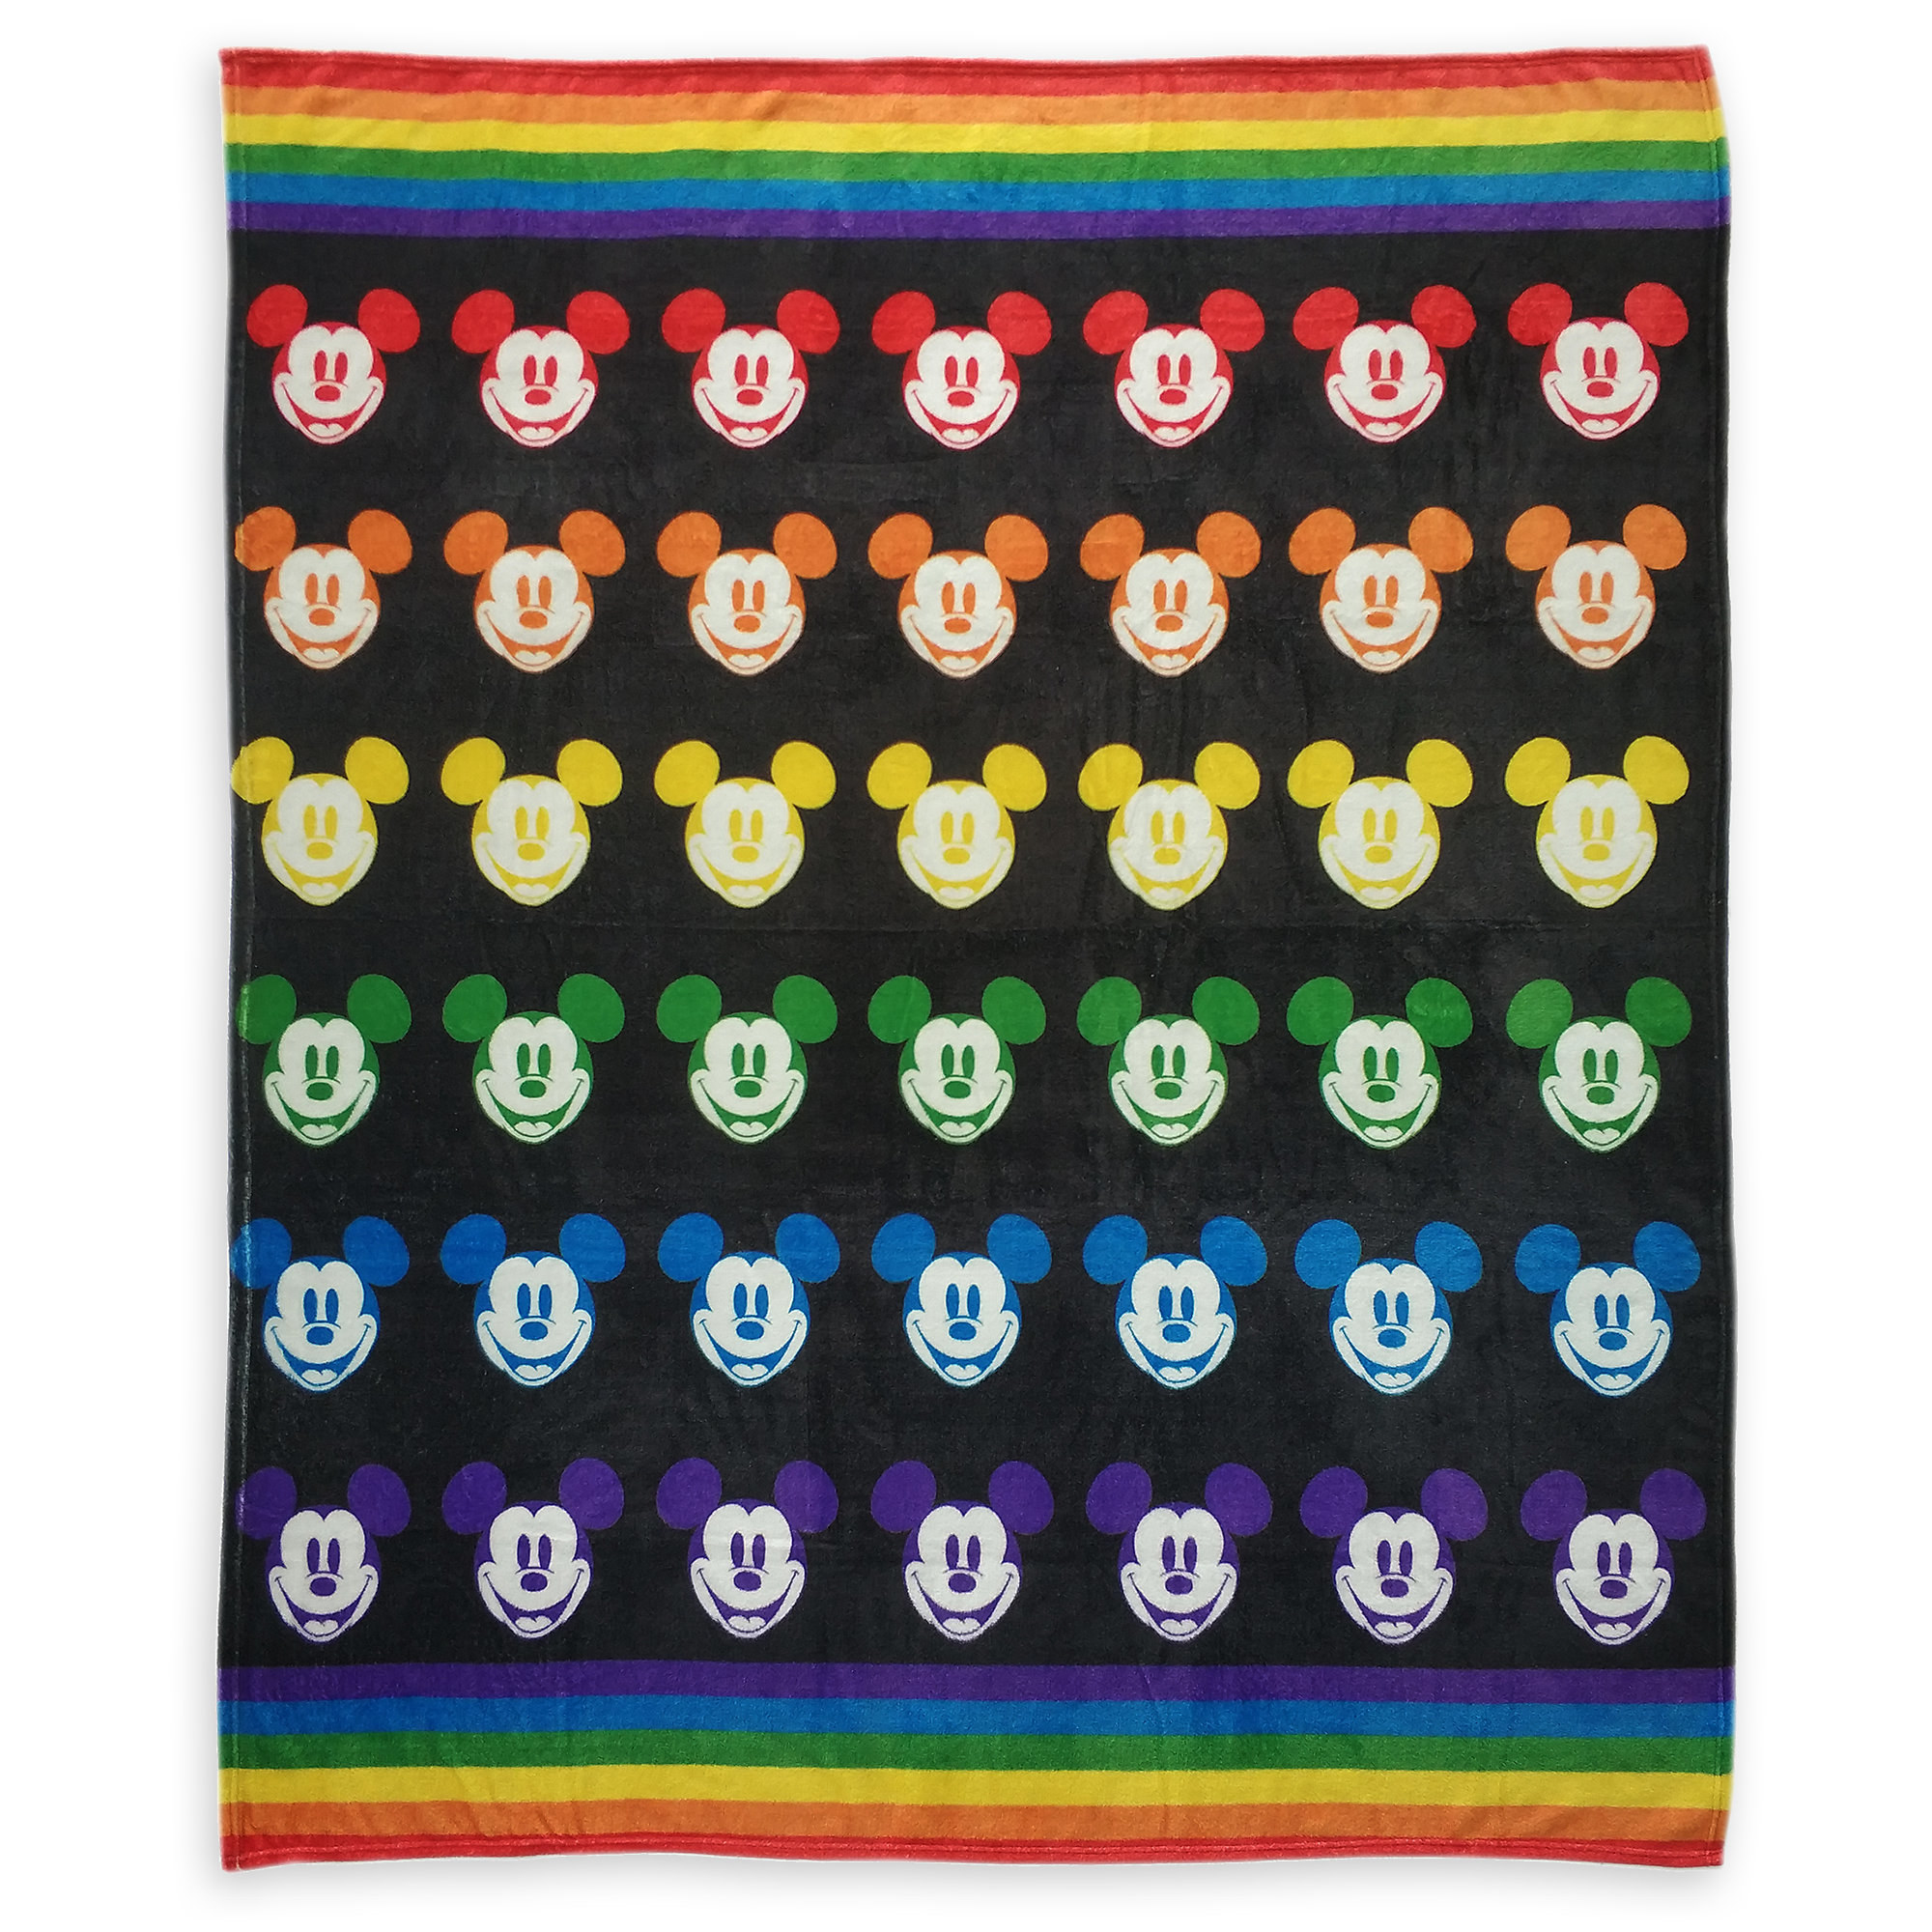 A large, soft throw blanket that has rainbow at the top and bottom and mickey&#x27;s face printed all across is in a repeating pattern